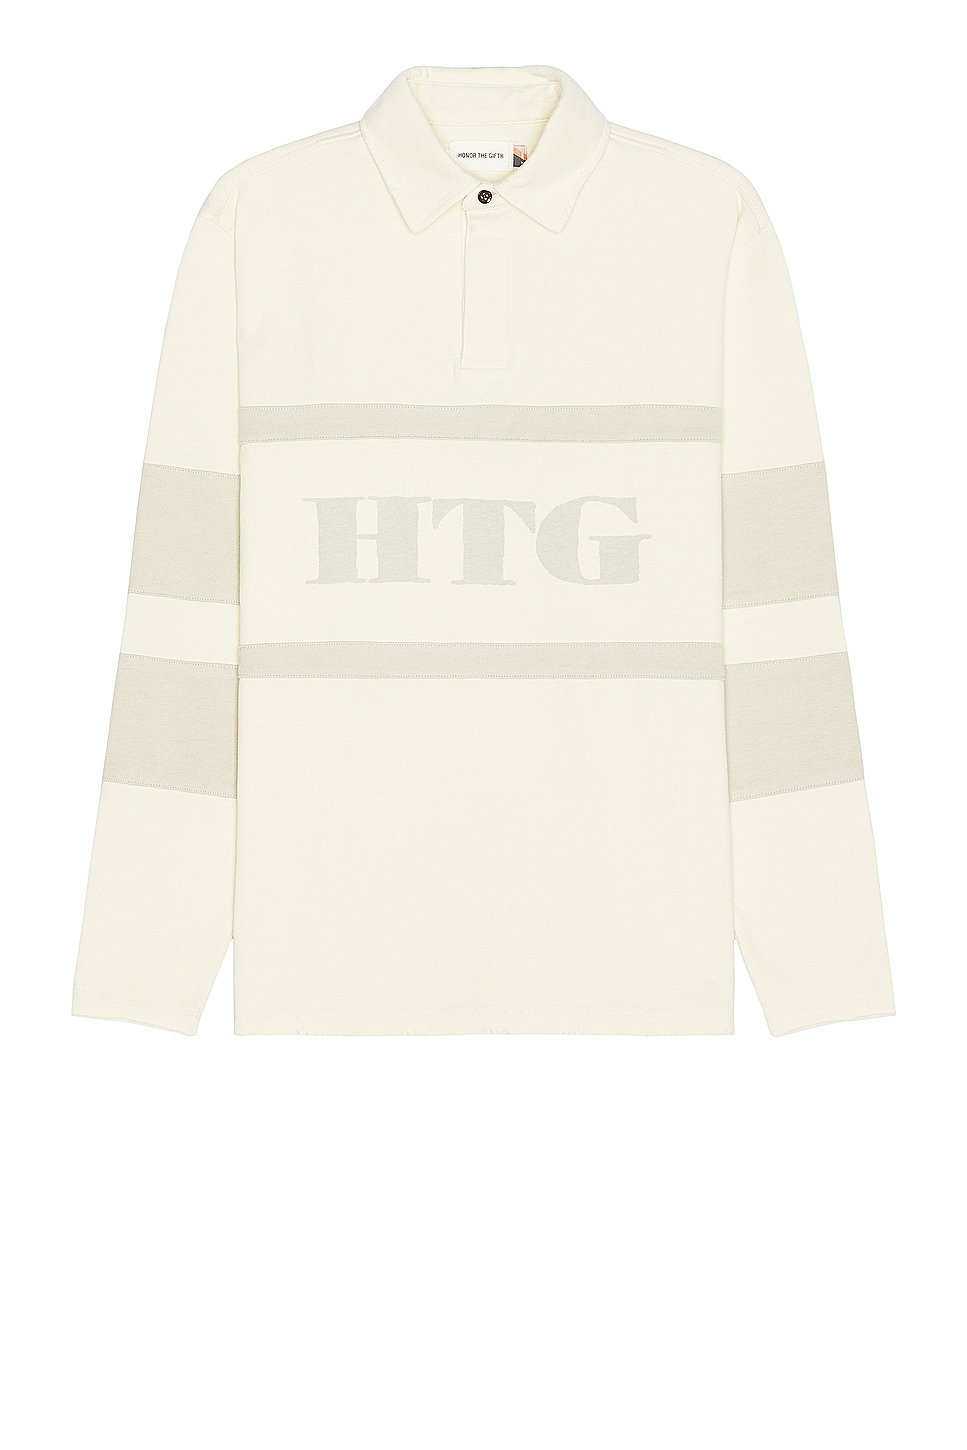 A-spring Oversized Rugby in Cream